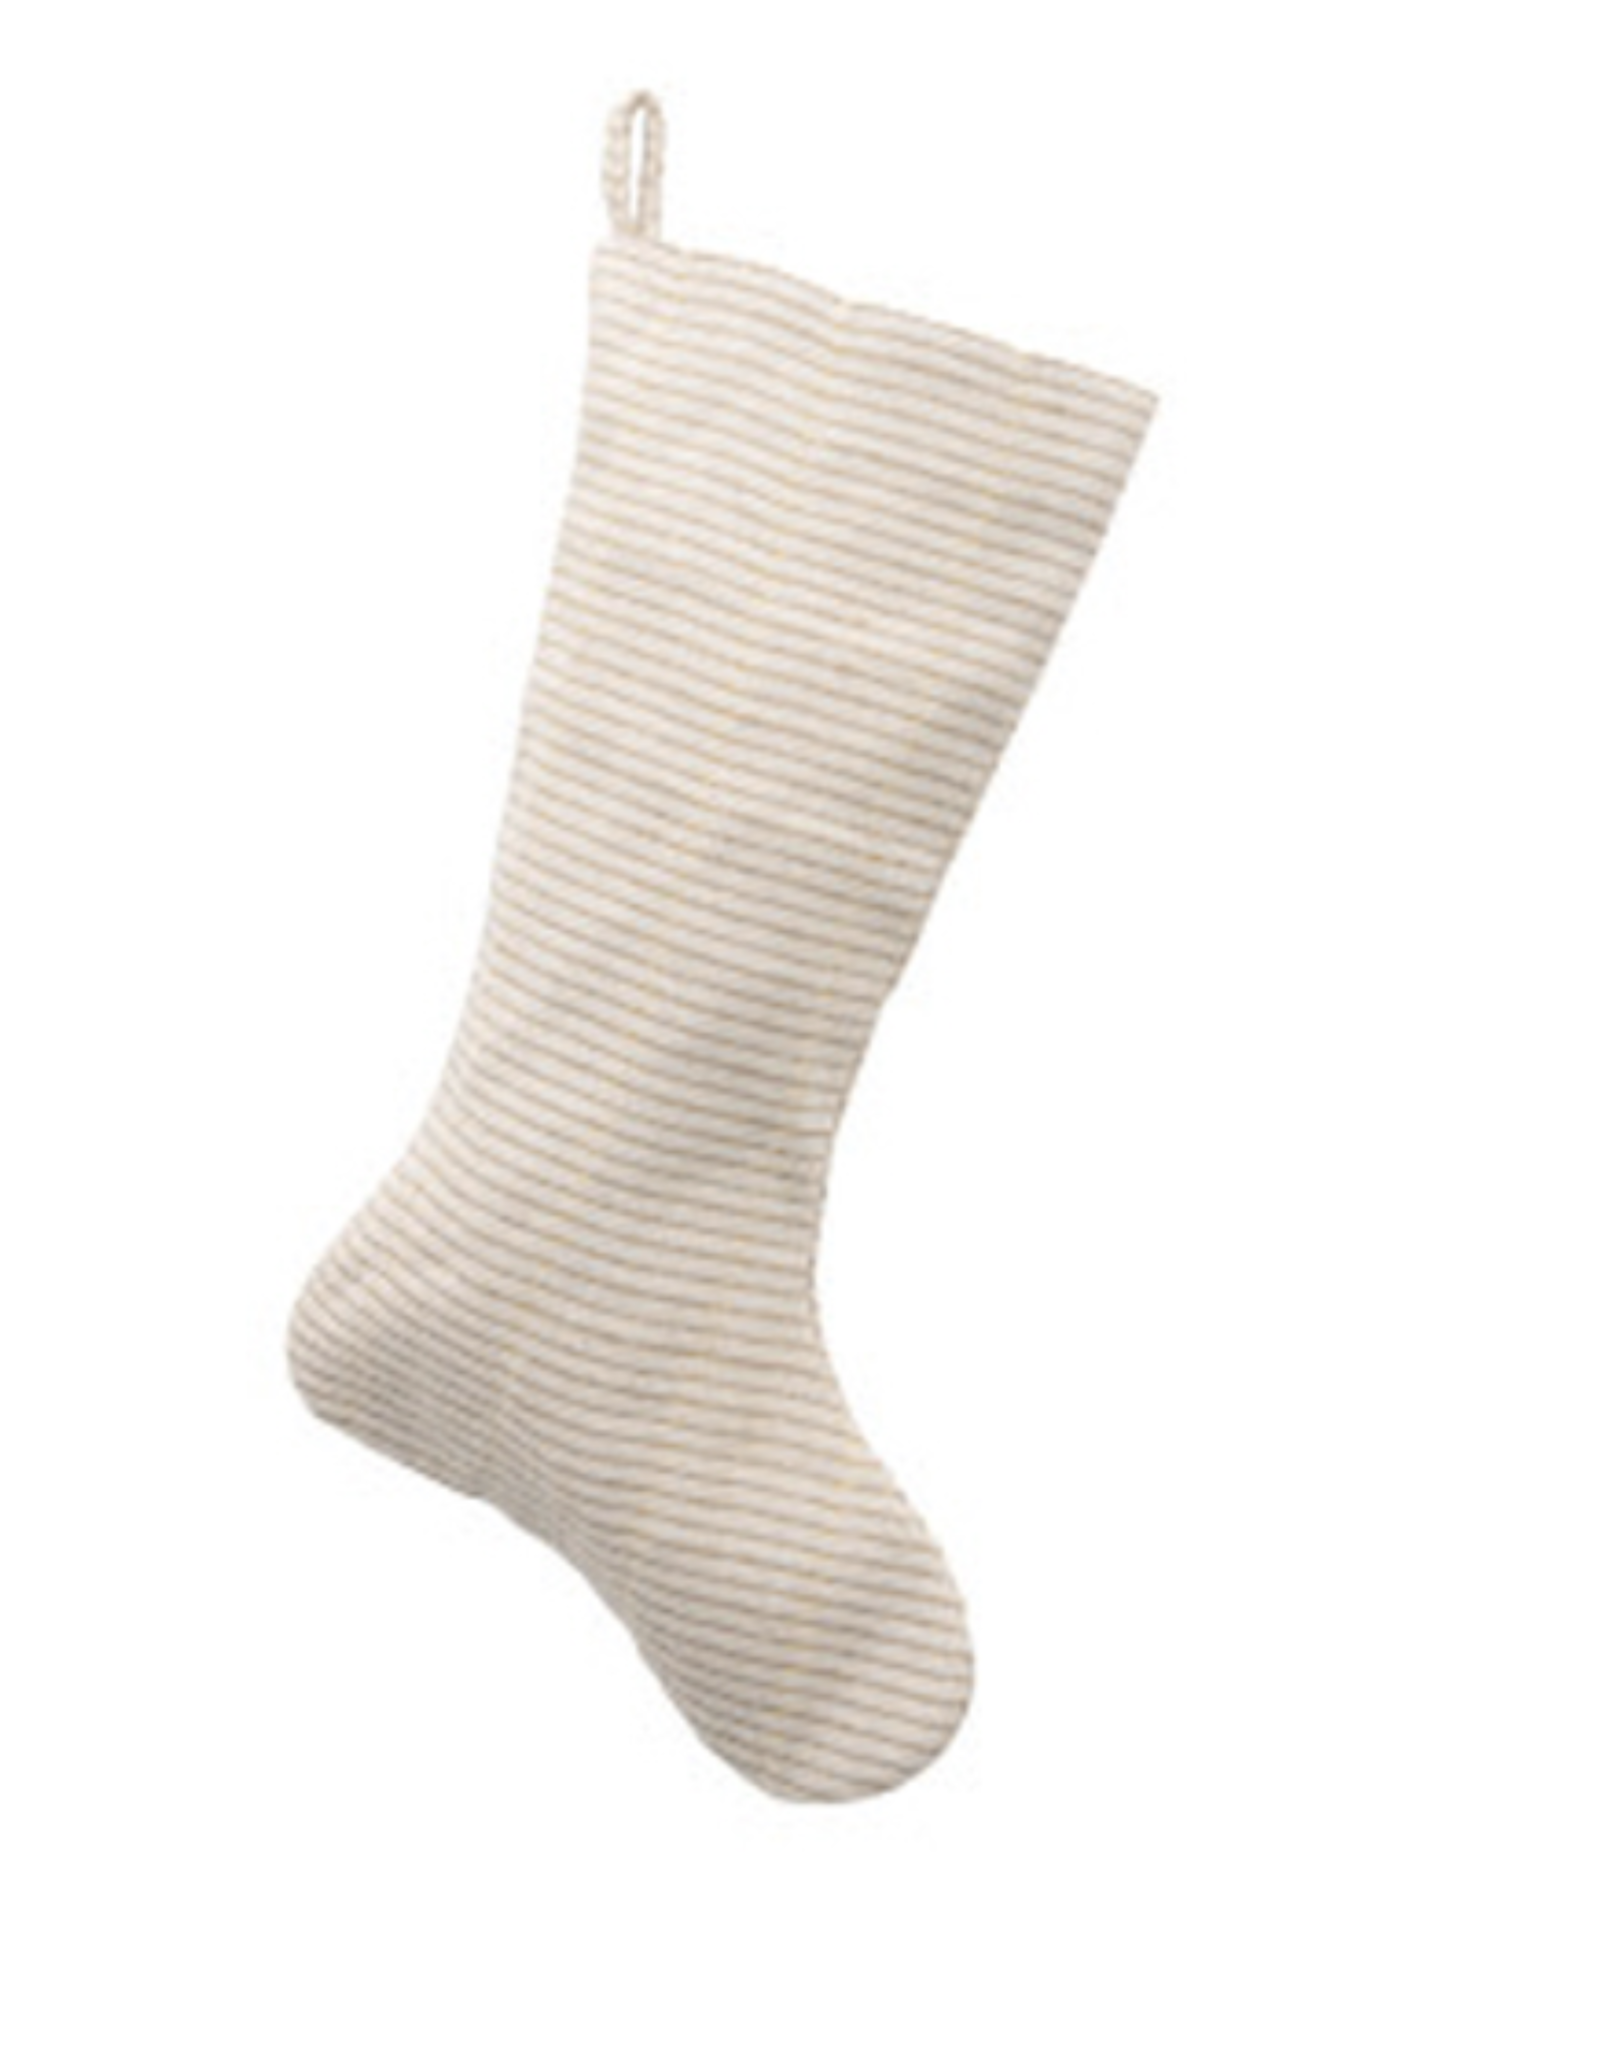 Cream with Gold Cotton and Jute Stocking